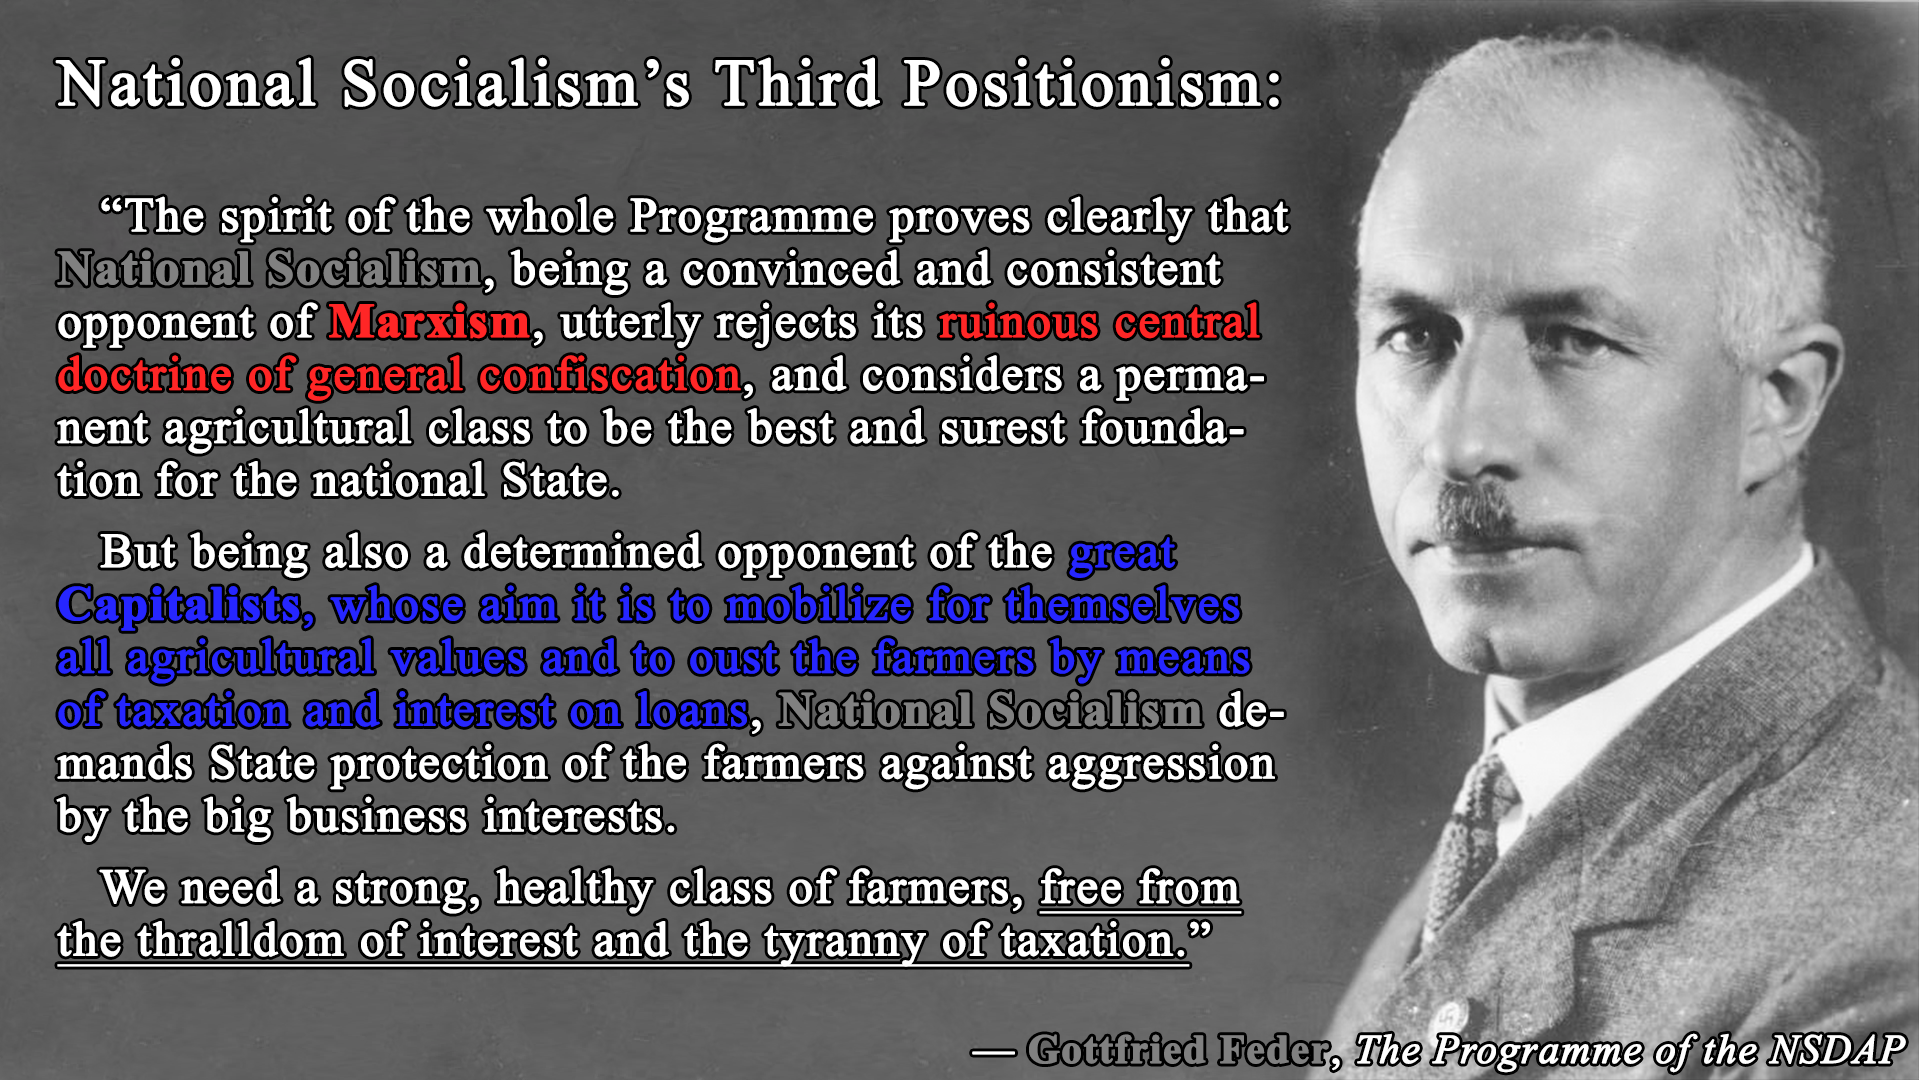 National Socialism’s Third Positionism by Gottfried Feder